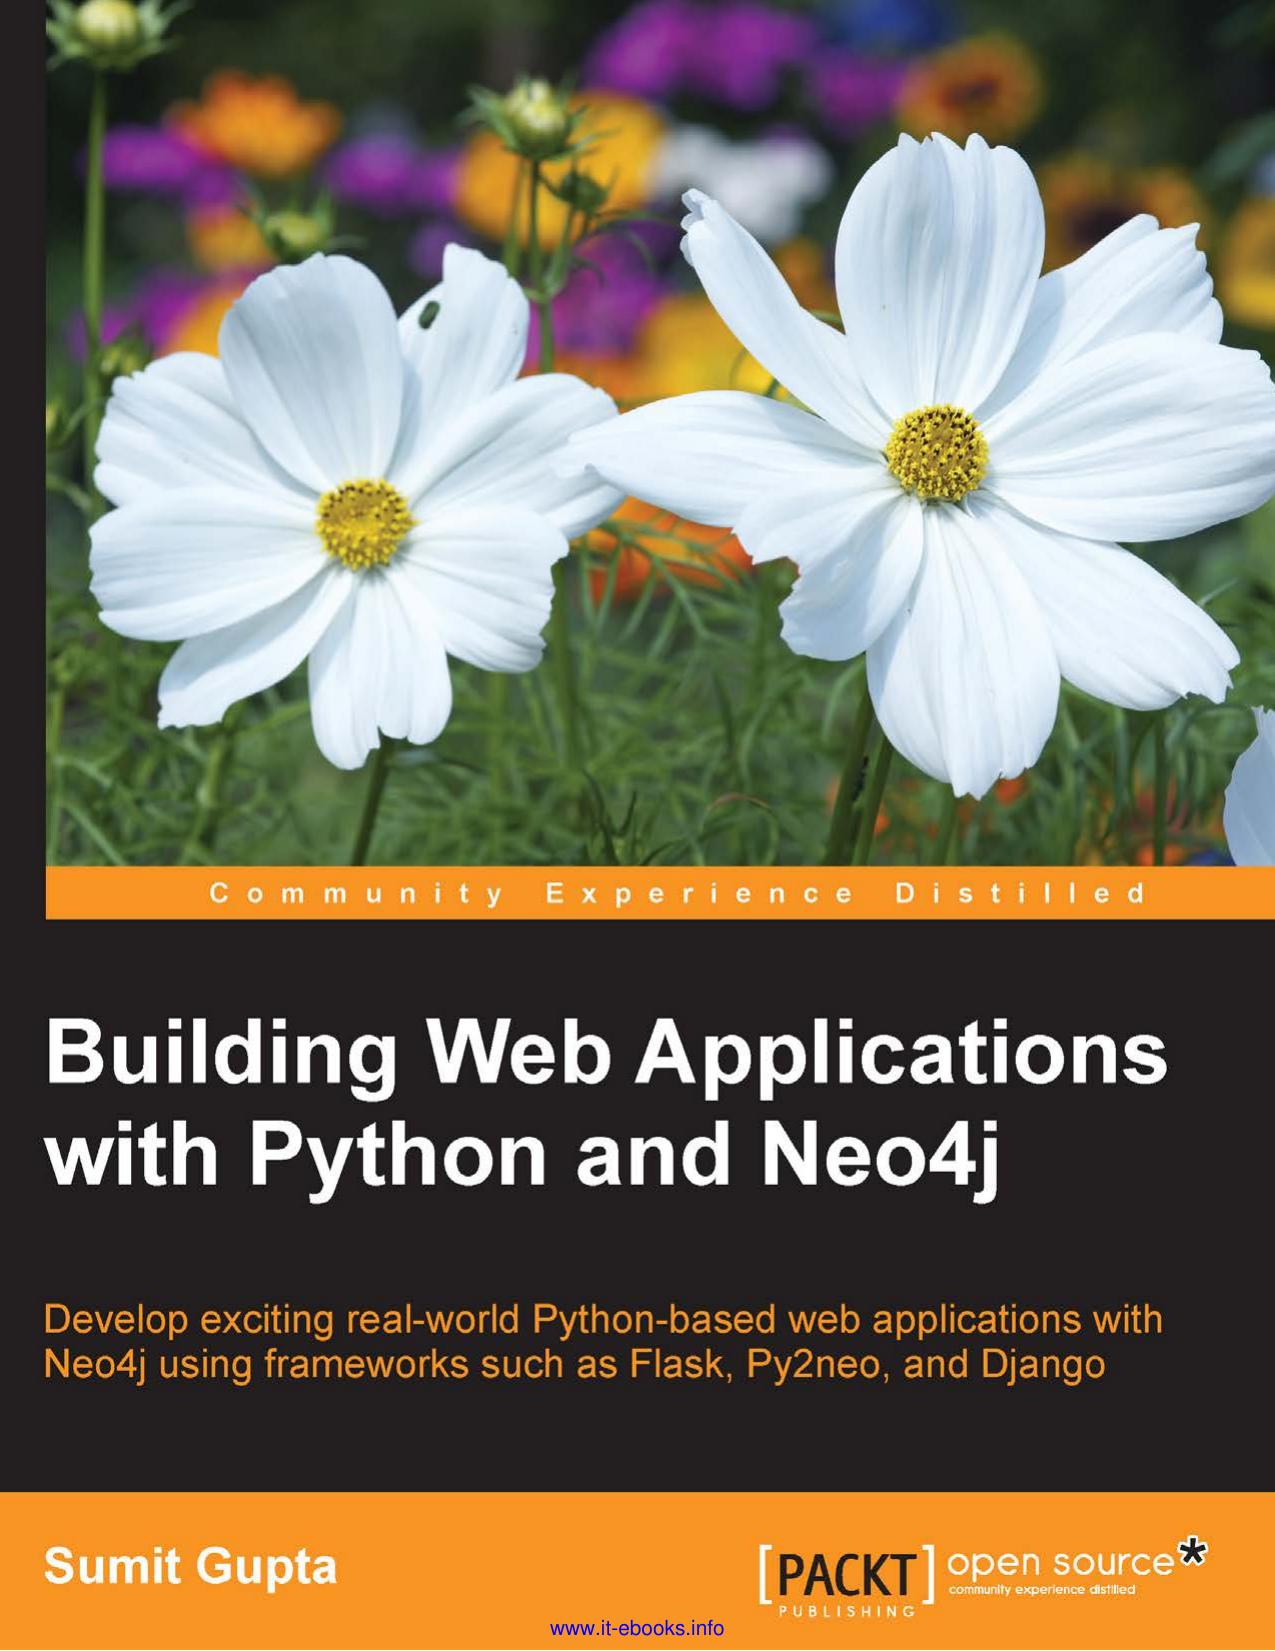 Building Web Applications With Python and Neo4j